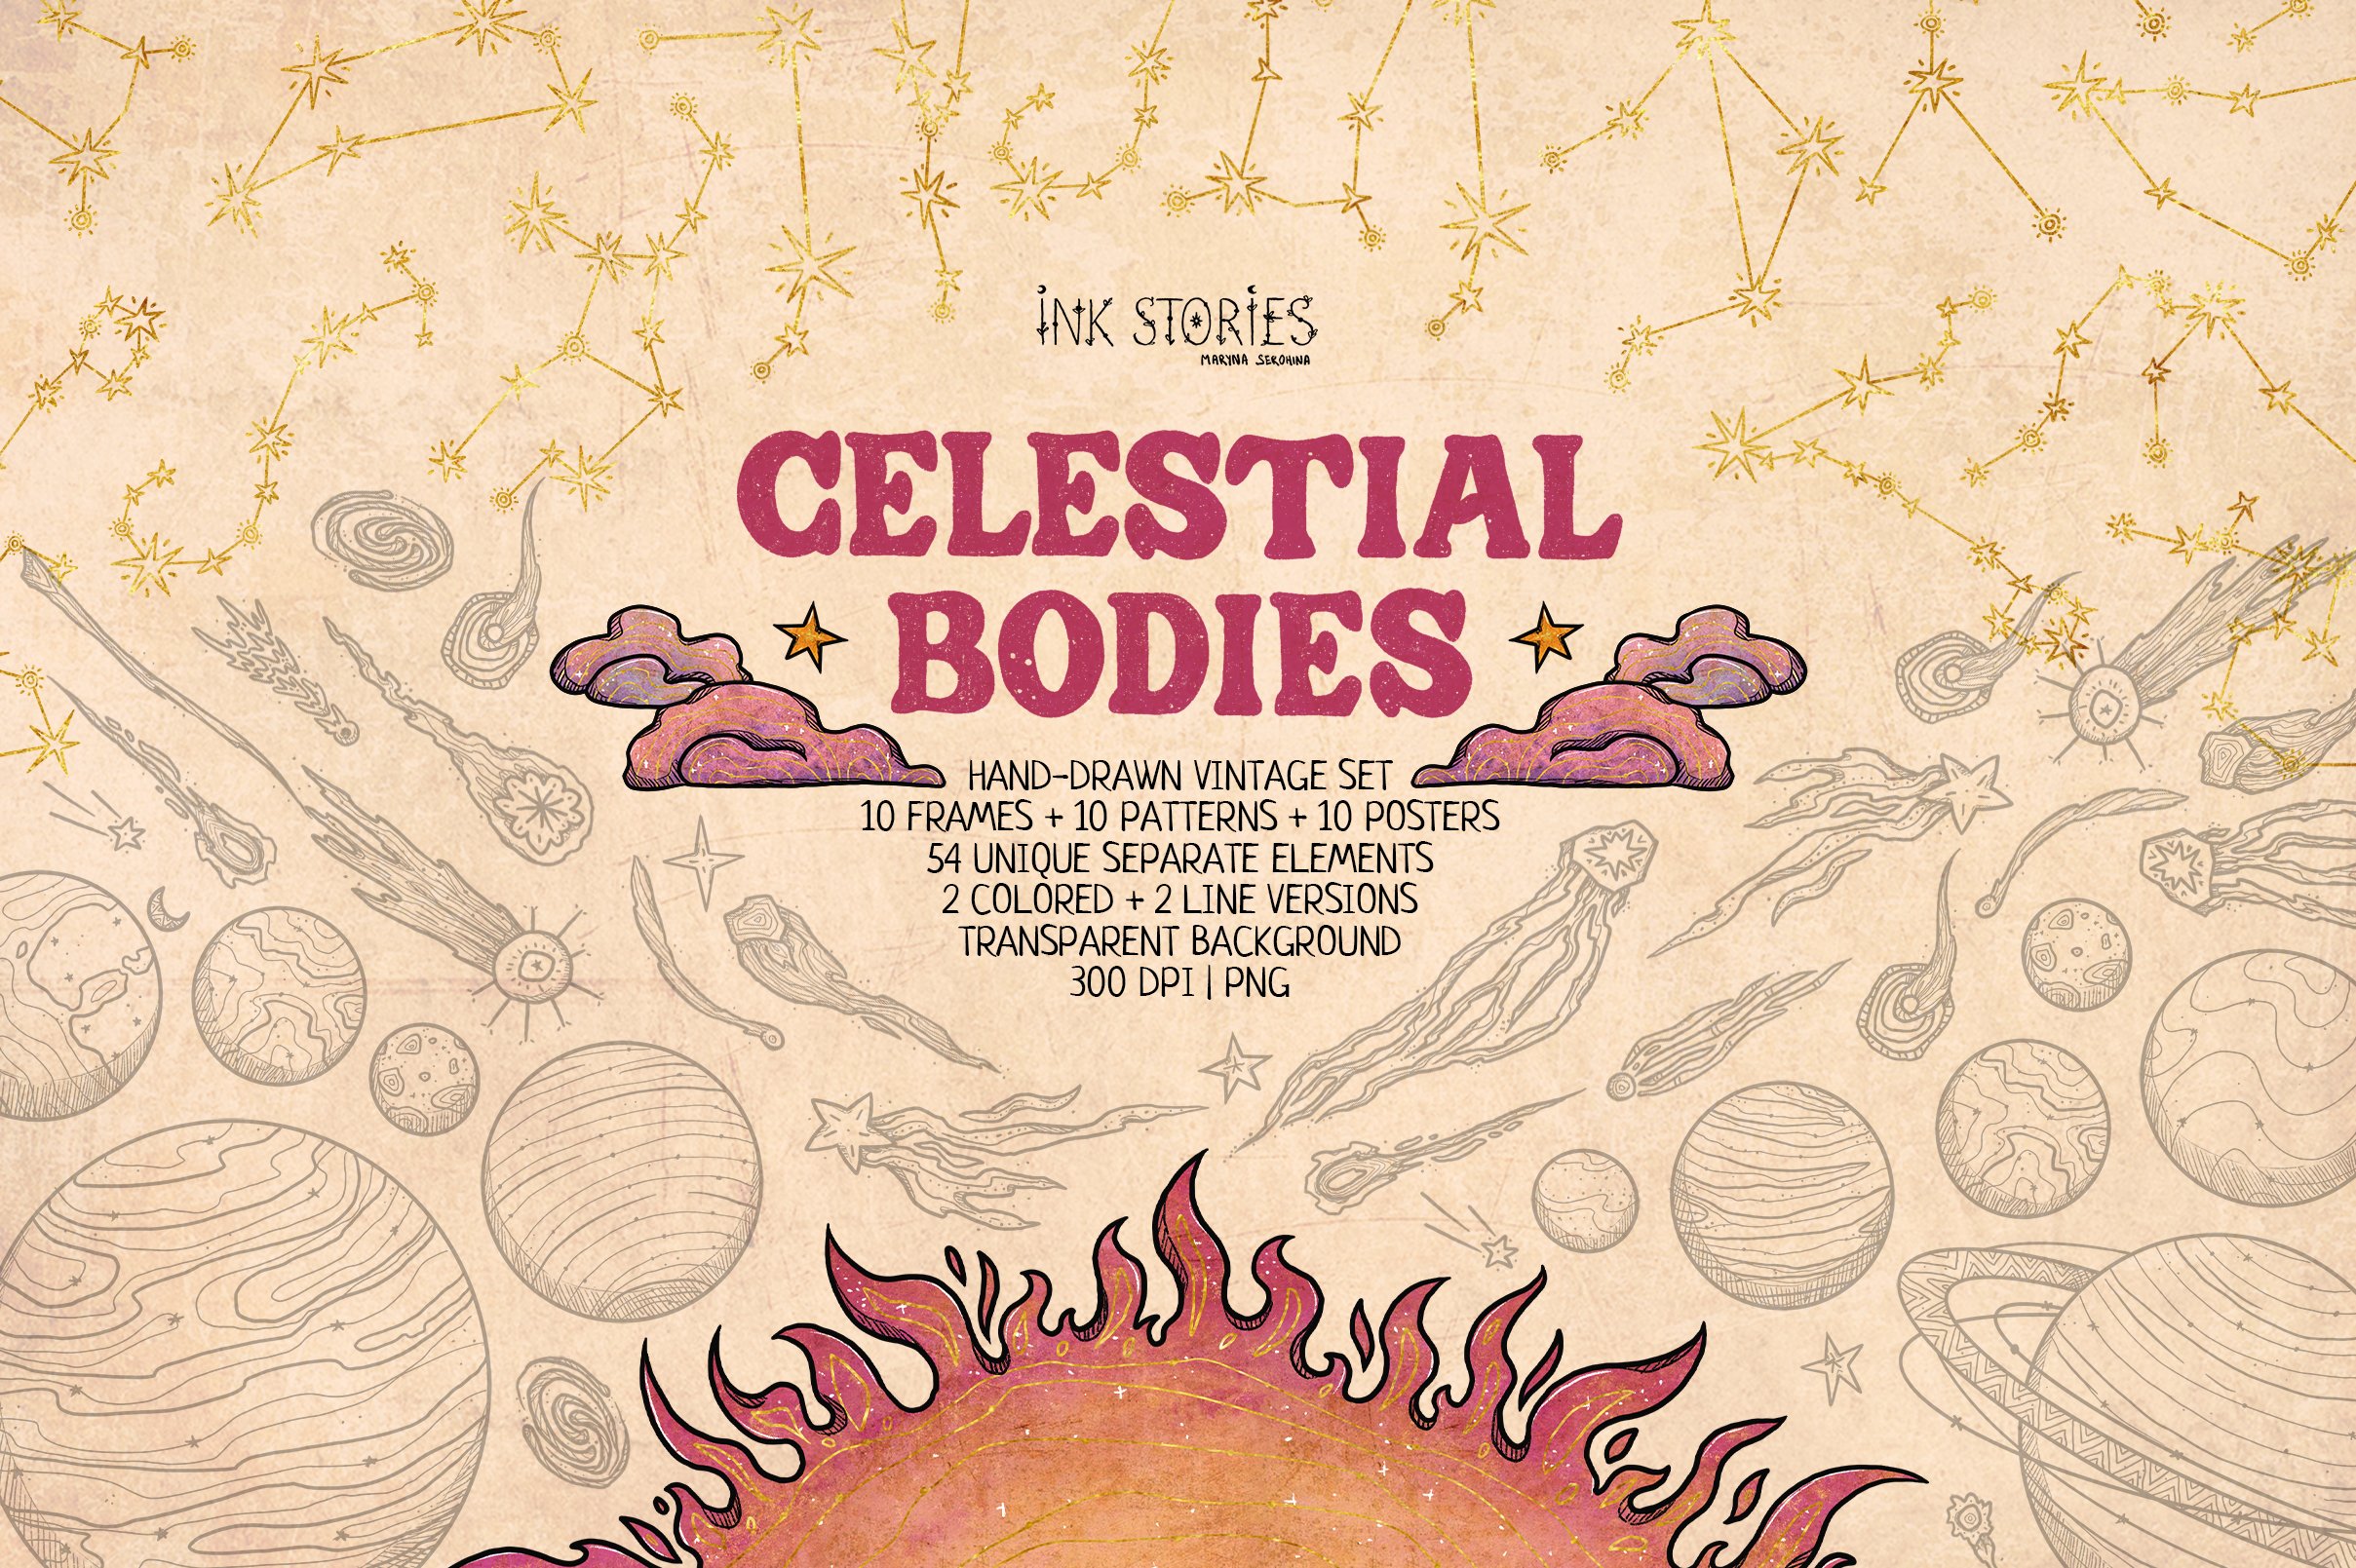 Celestial Bodies cover image.